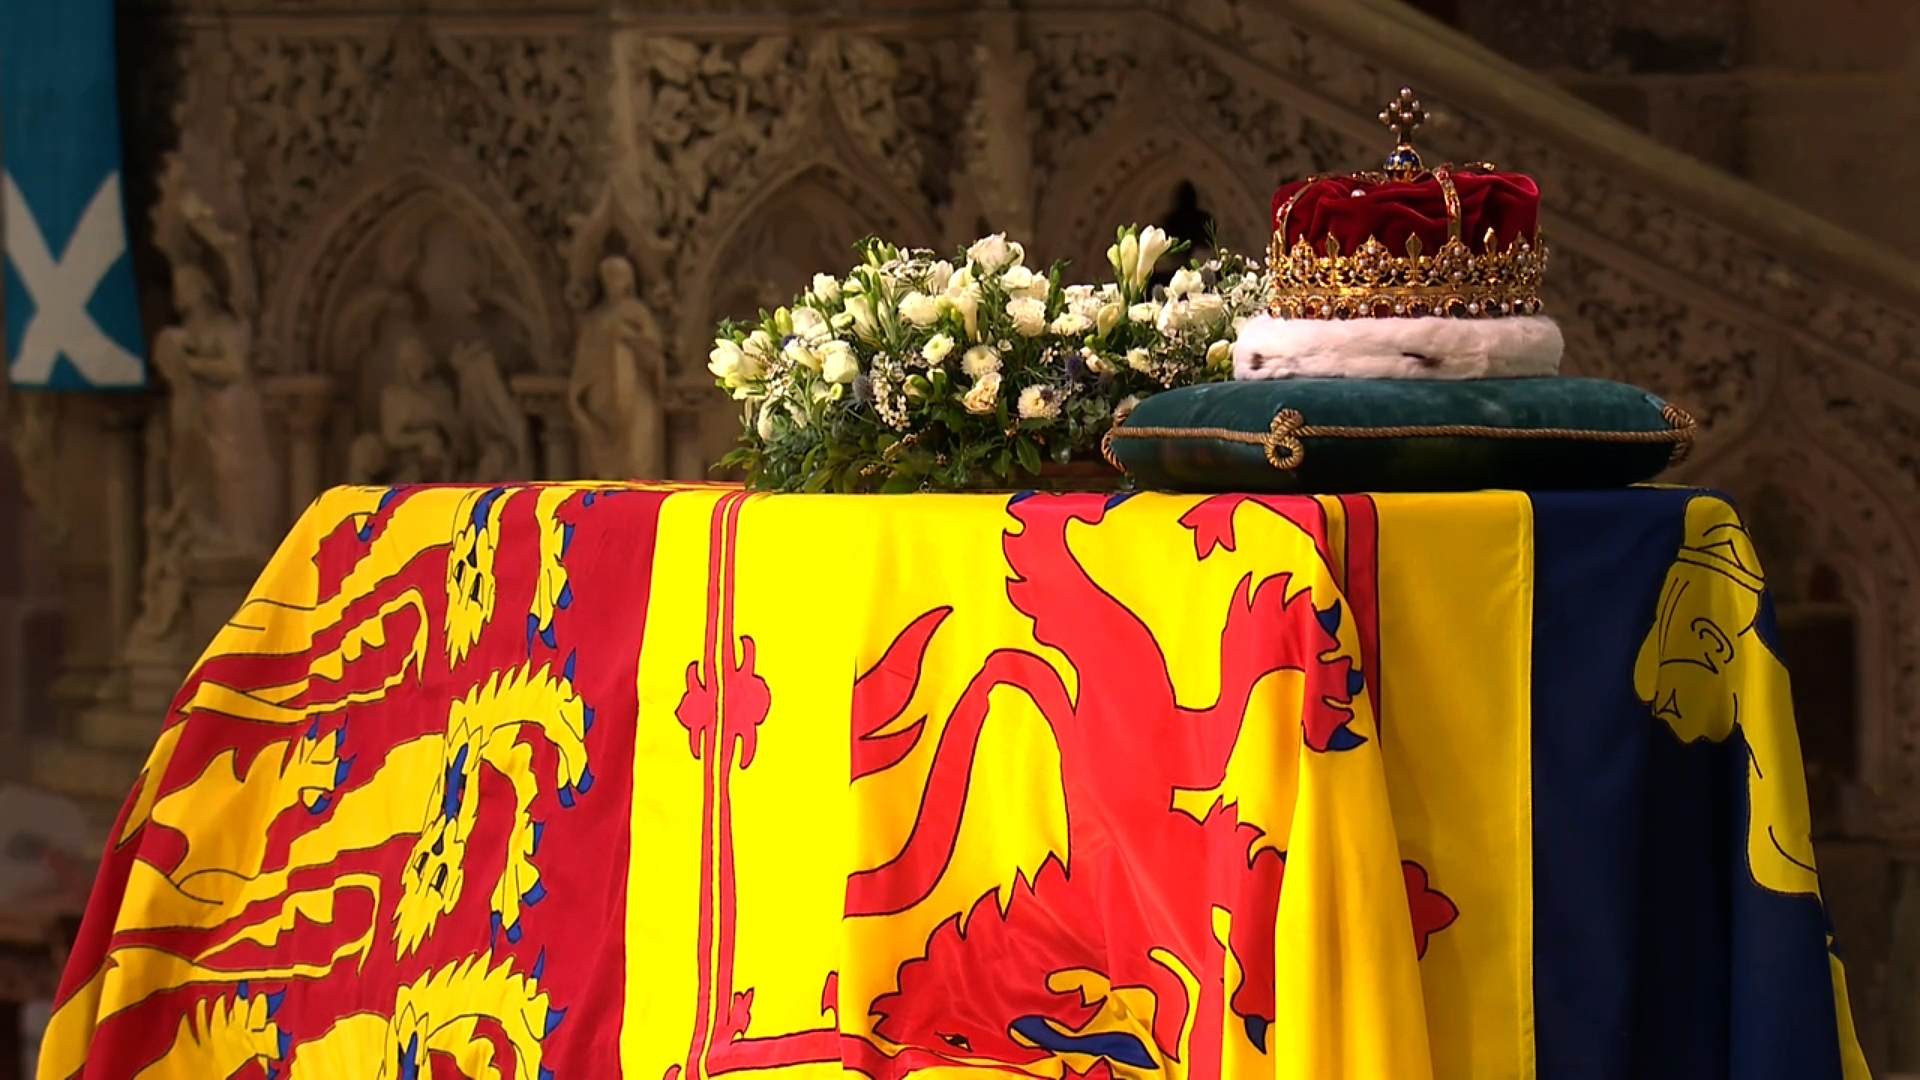 The Queen's coffin draped in flags